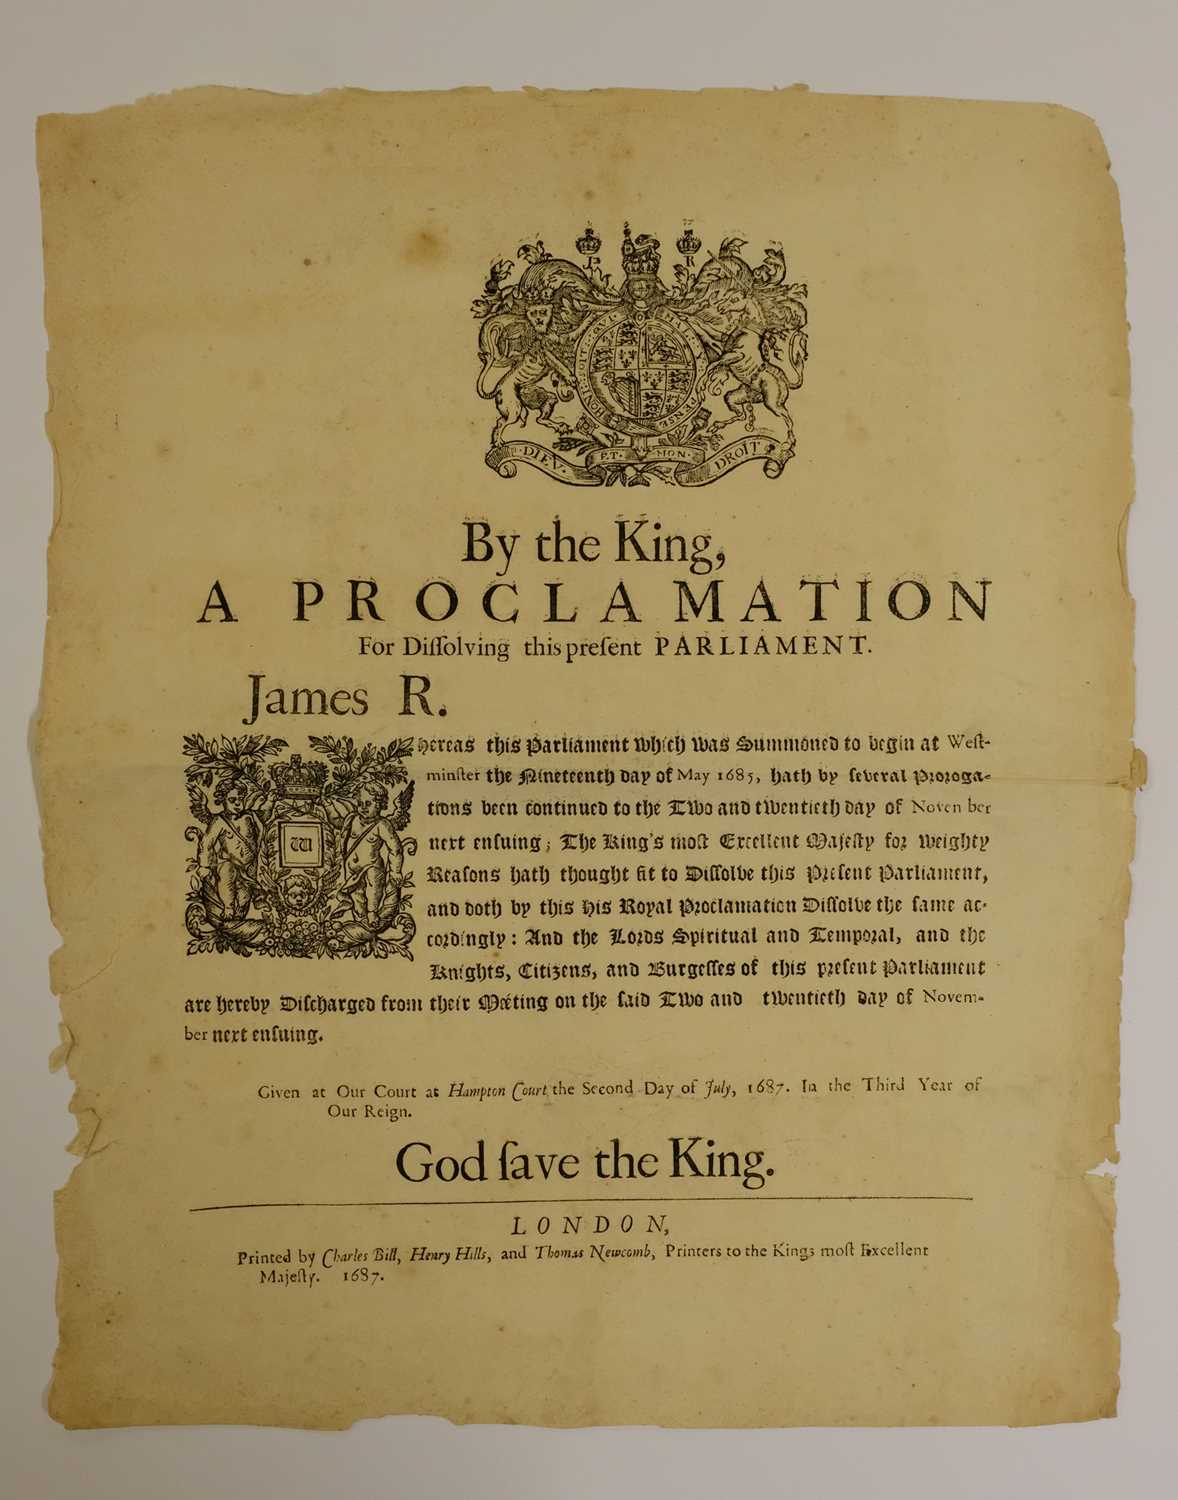 Lot 235 - James II (King of England). Proclamation for dissolving Parliament, 2 July 1687